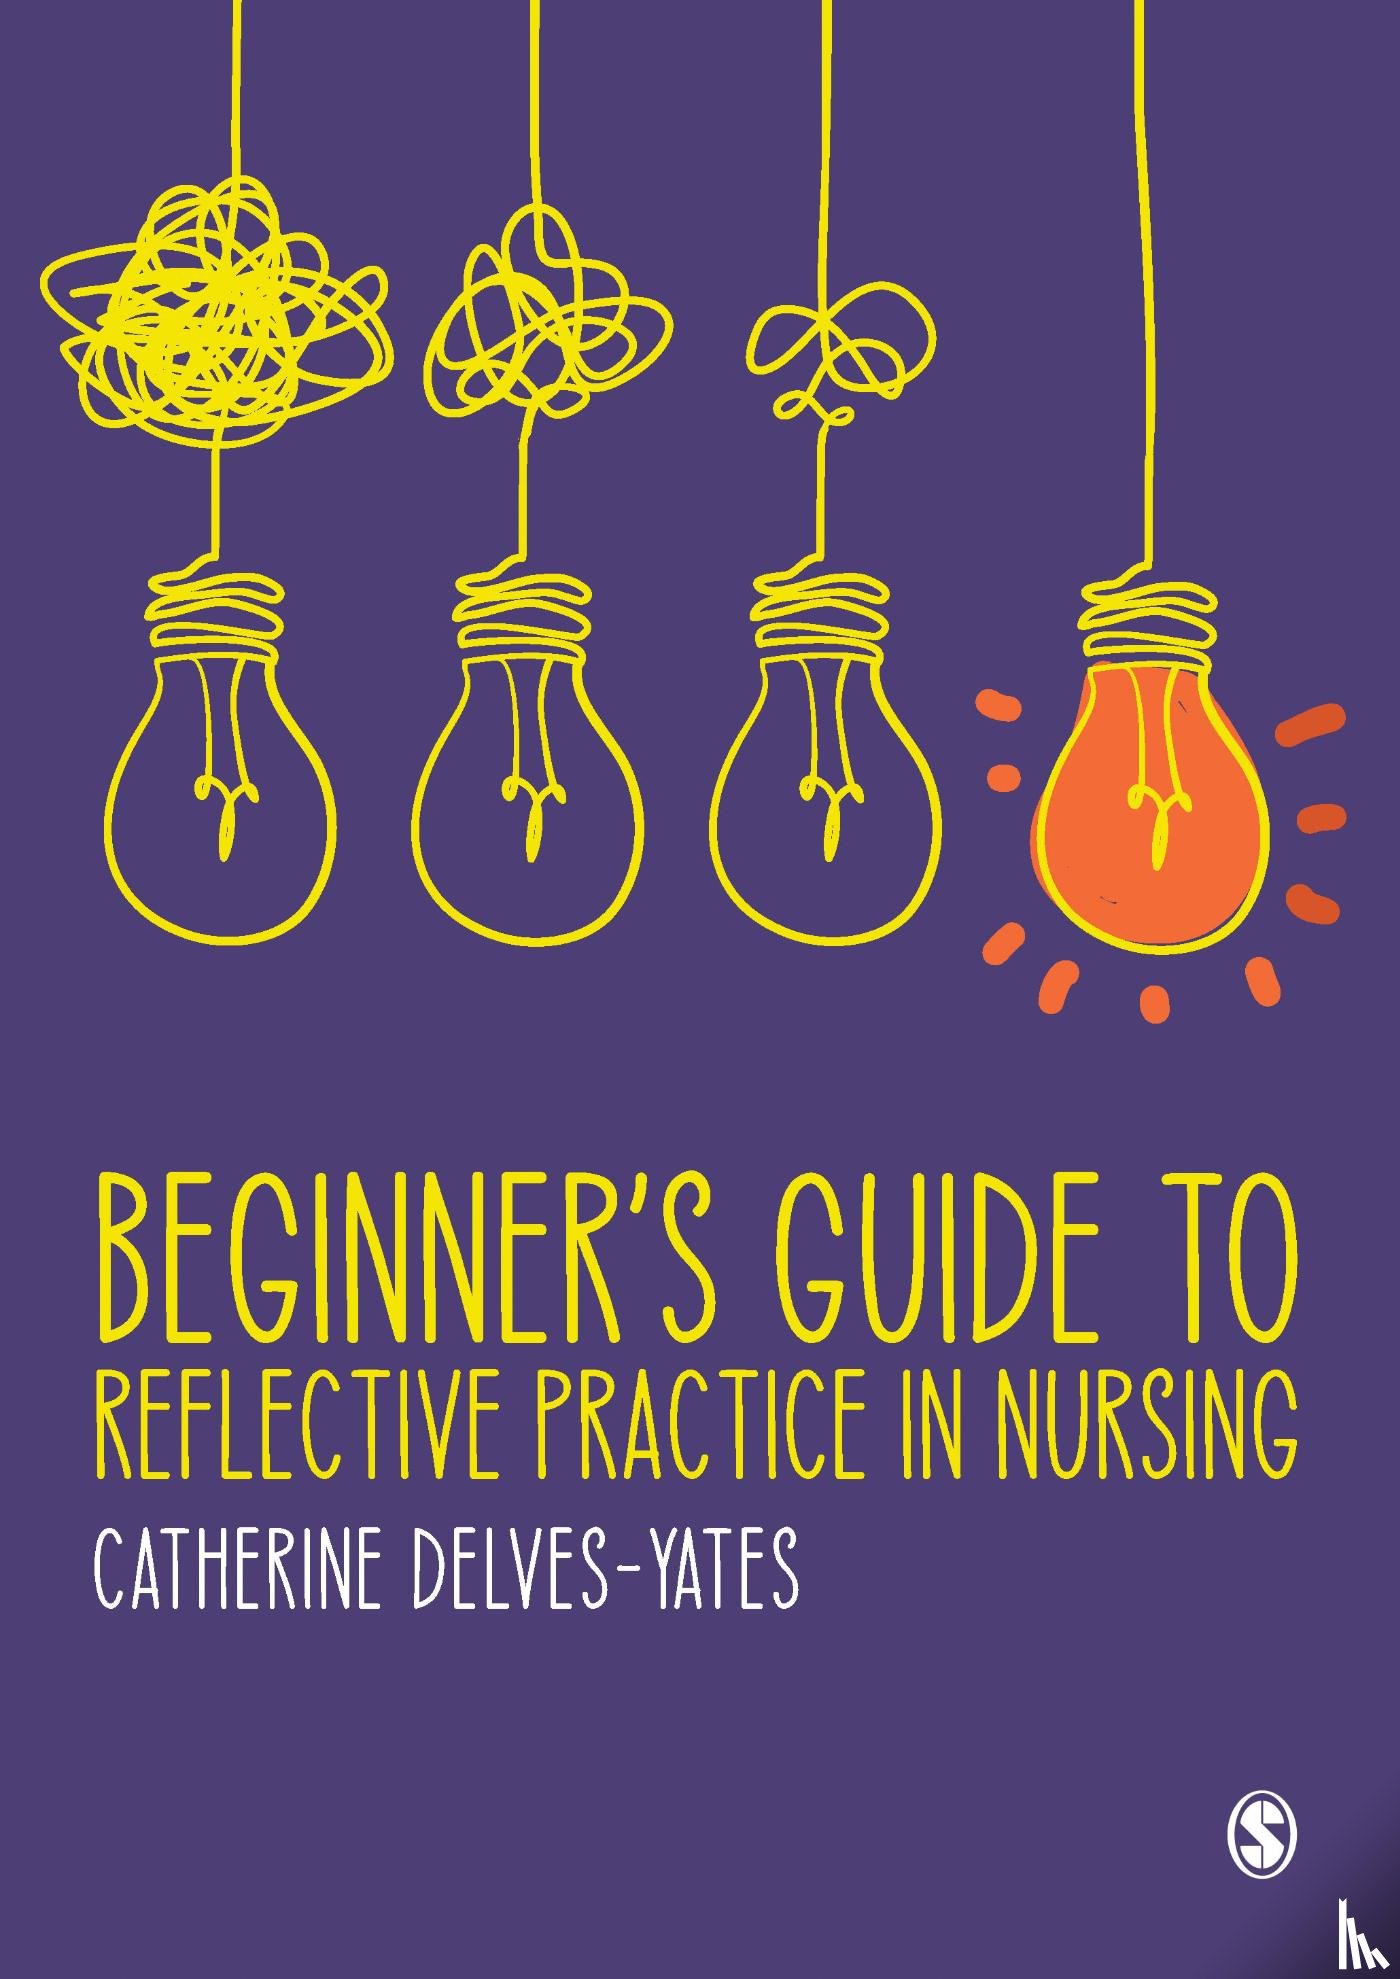 Delves-Yates, Catherine - Beginner's Guide to Reflective Practice in Nursing